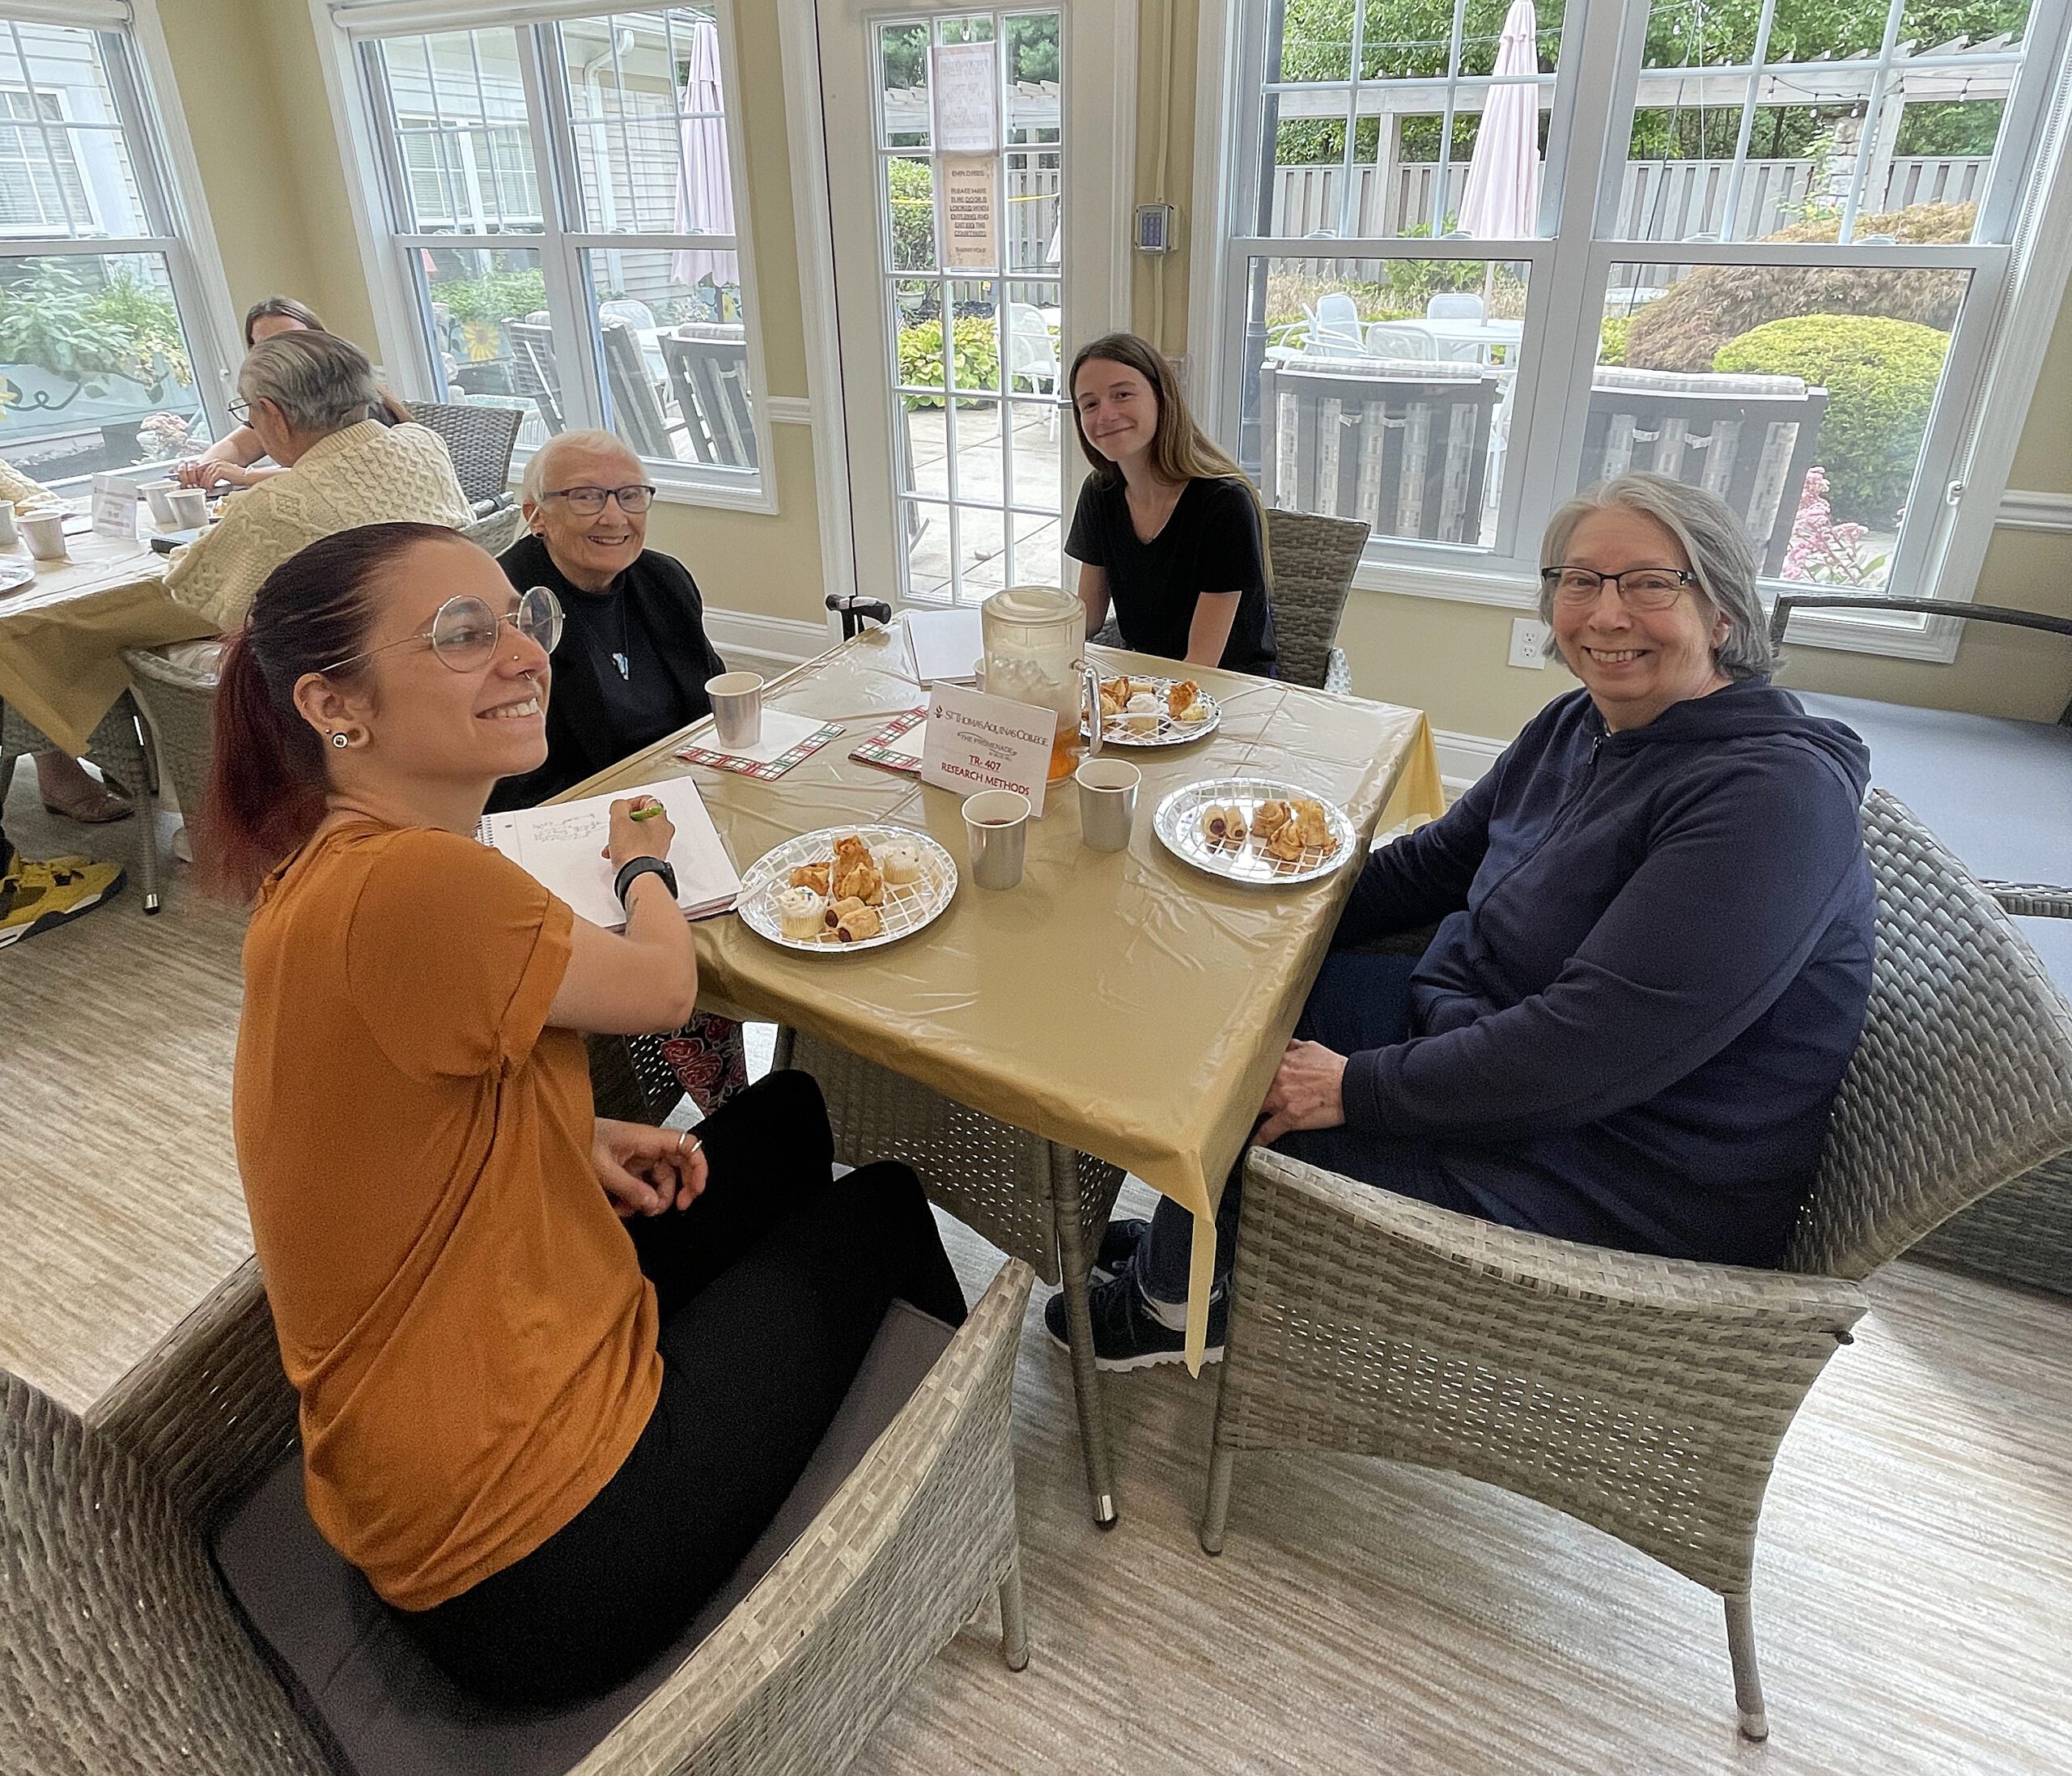 two students and two participants at assisted living center seated at table smiling enjoying food together